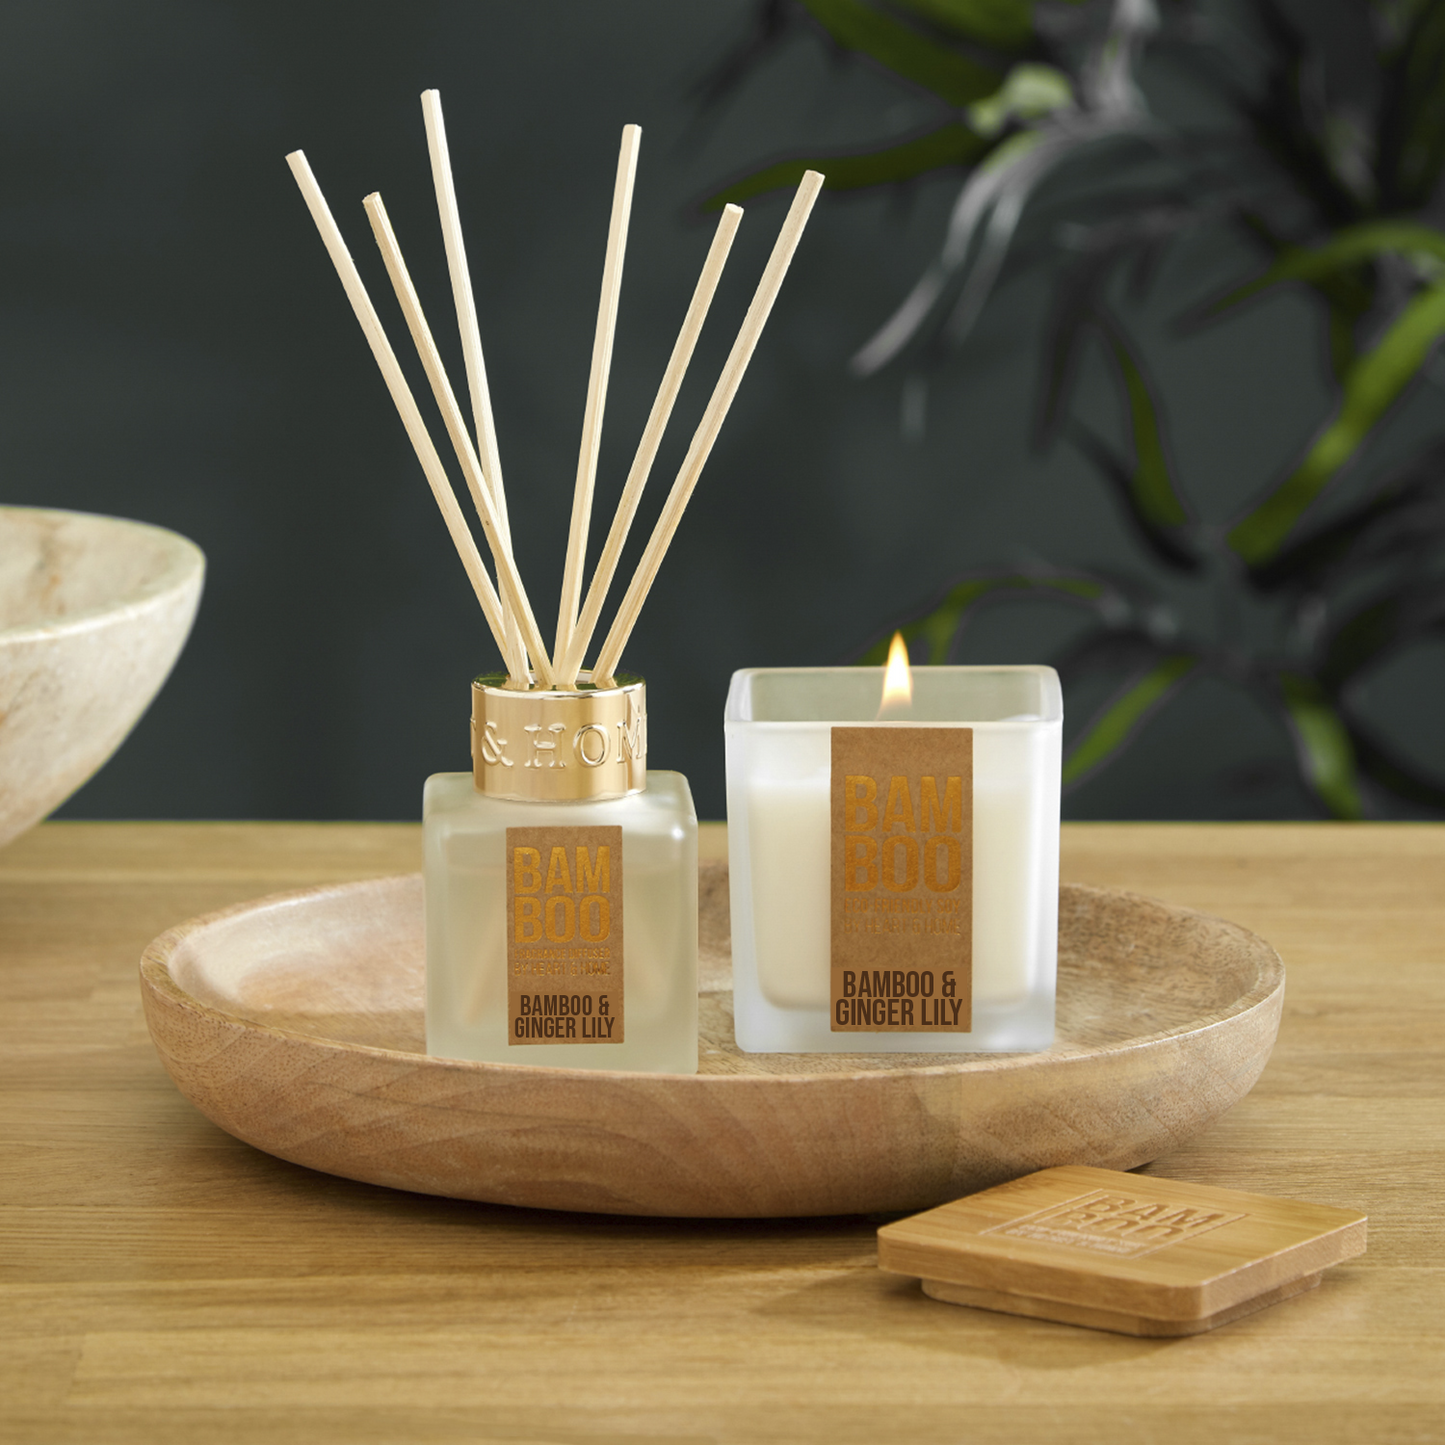 Bamboo & Ginger Lily Candle and Diffuser Set